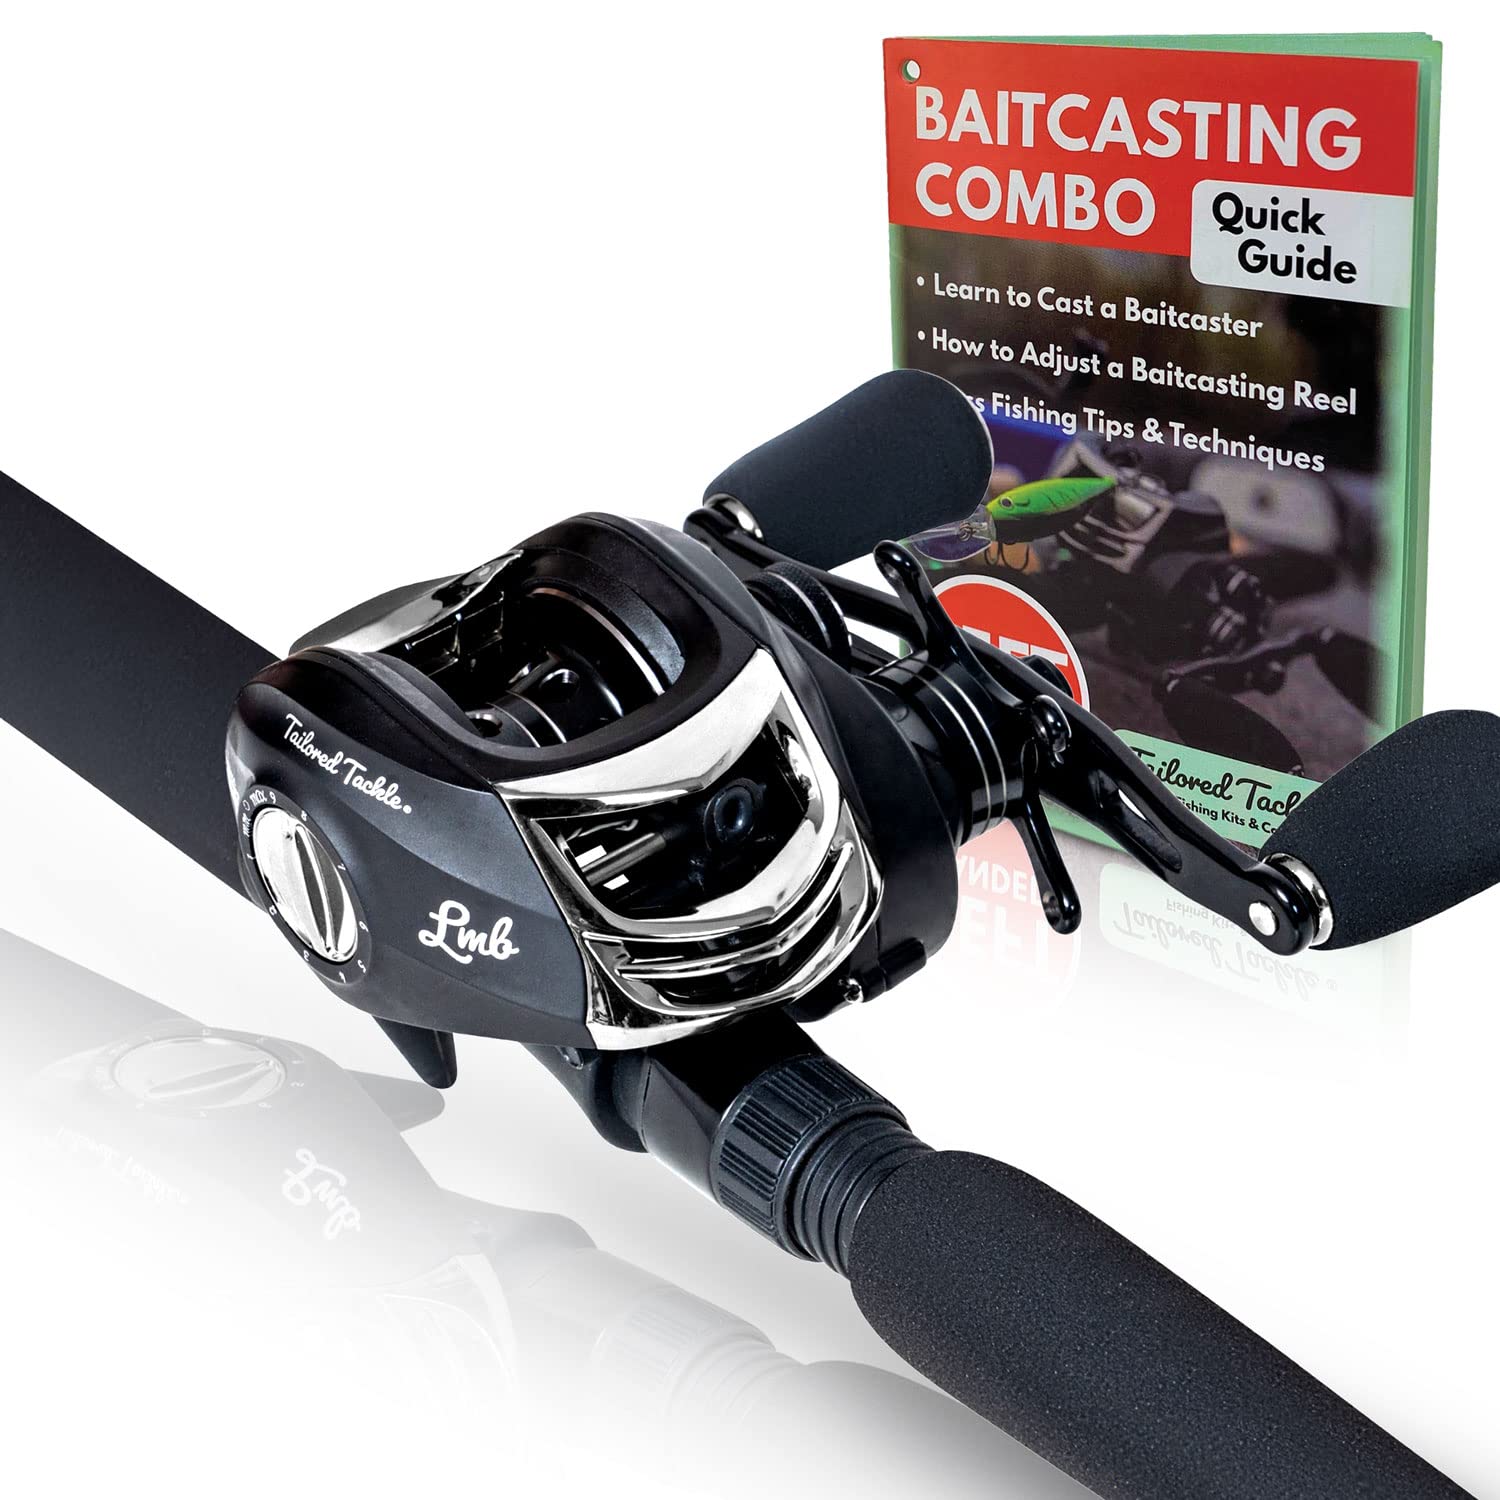 How to Adjust a Baitcasting Reel: Expert Tips